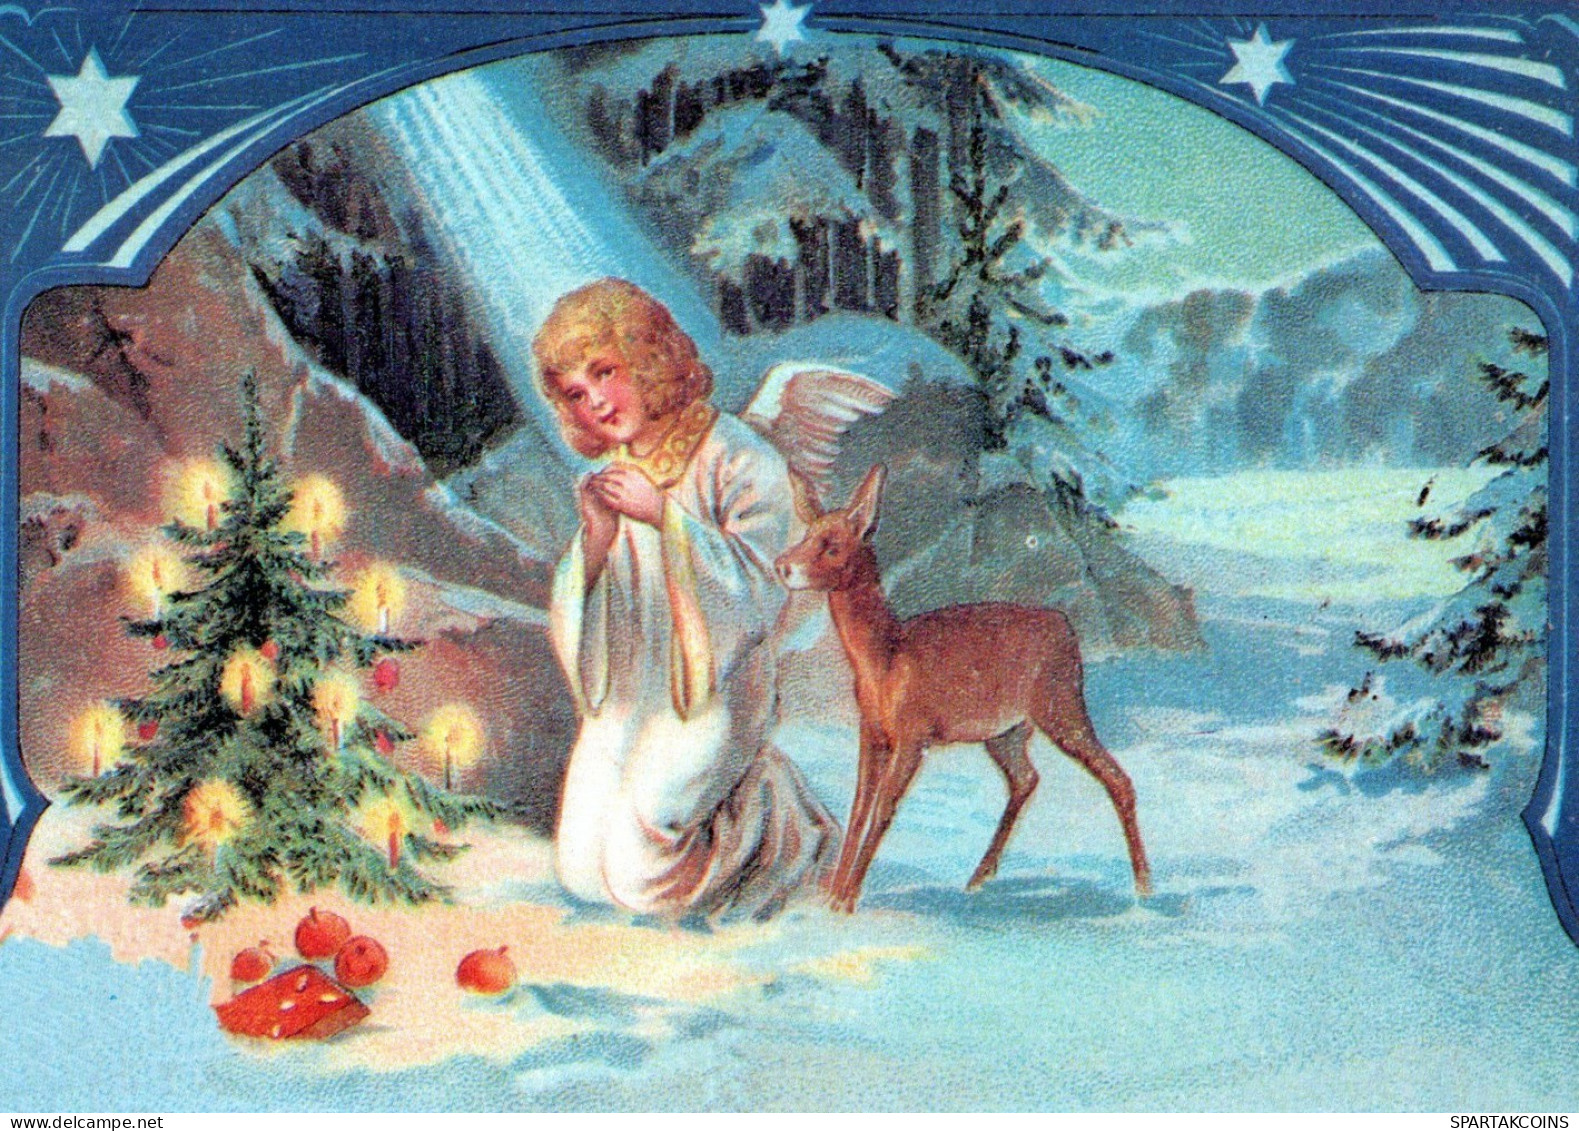 ANGELO Buon Anno Natale Vintage Cartolina CPSM #PAH079.IT - Anges